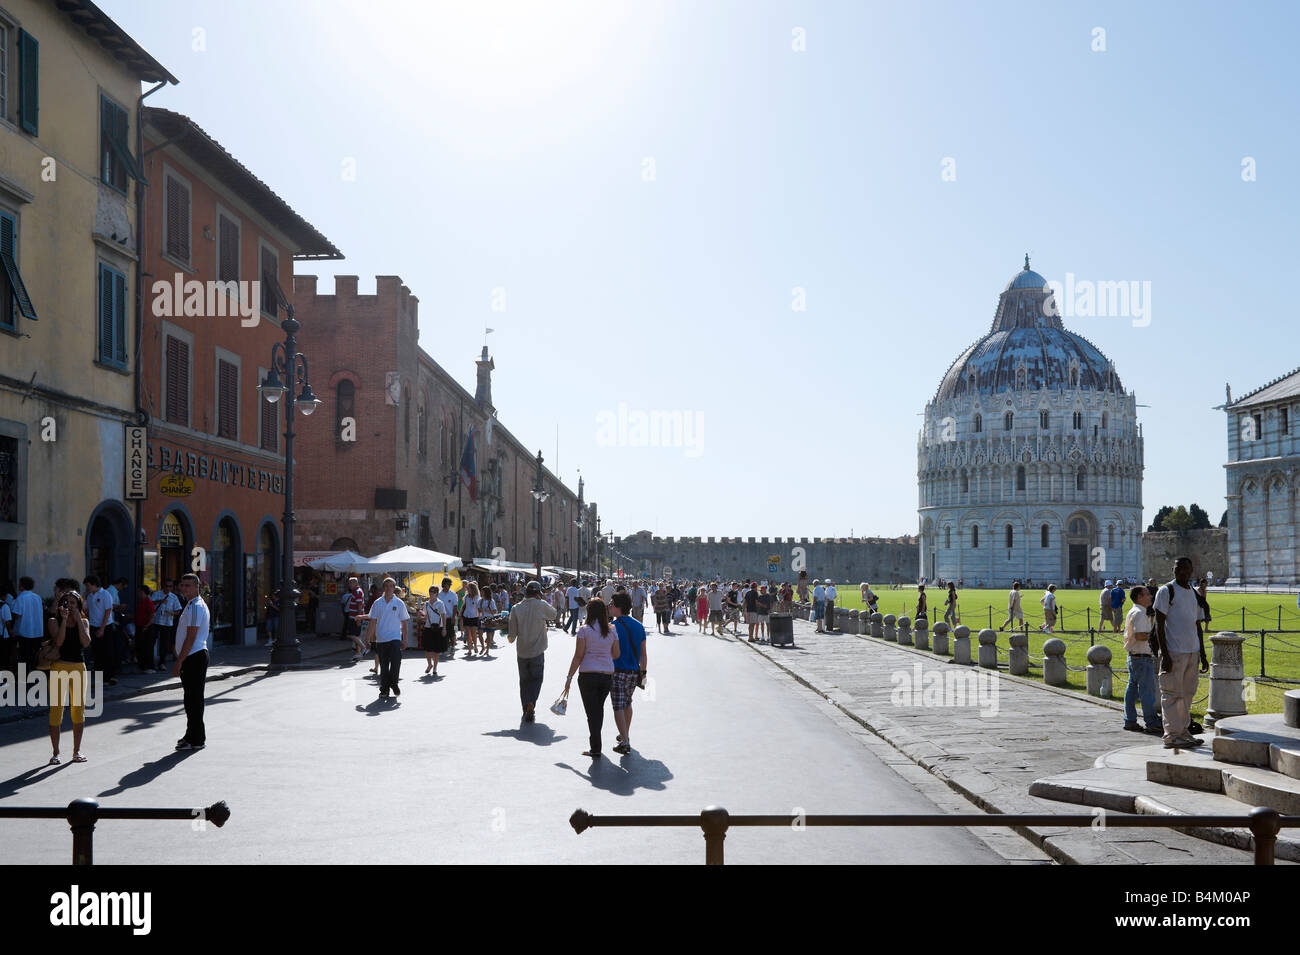 The Baptistry and shops in the Piazza dei Miracoli, Pisa, Tuscany, Italy Stock Photo